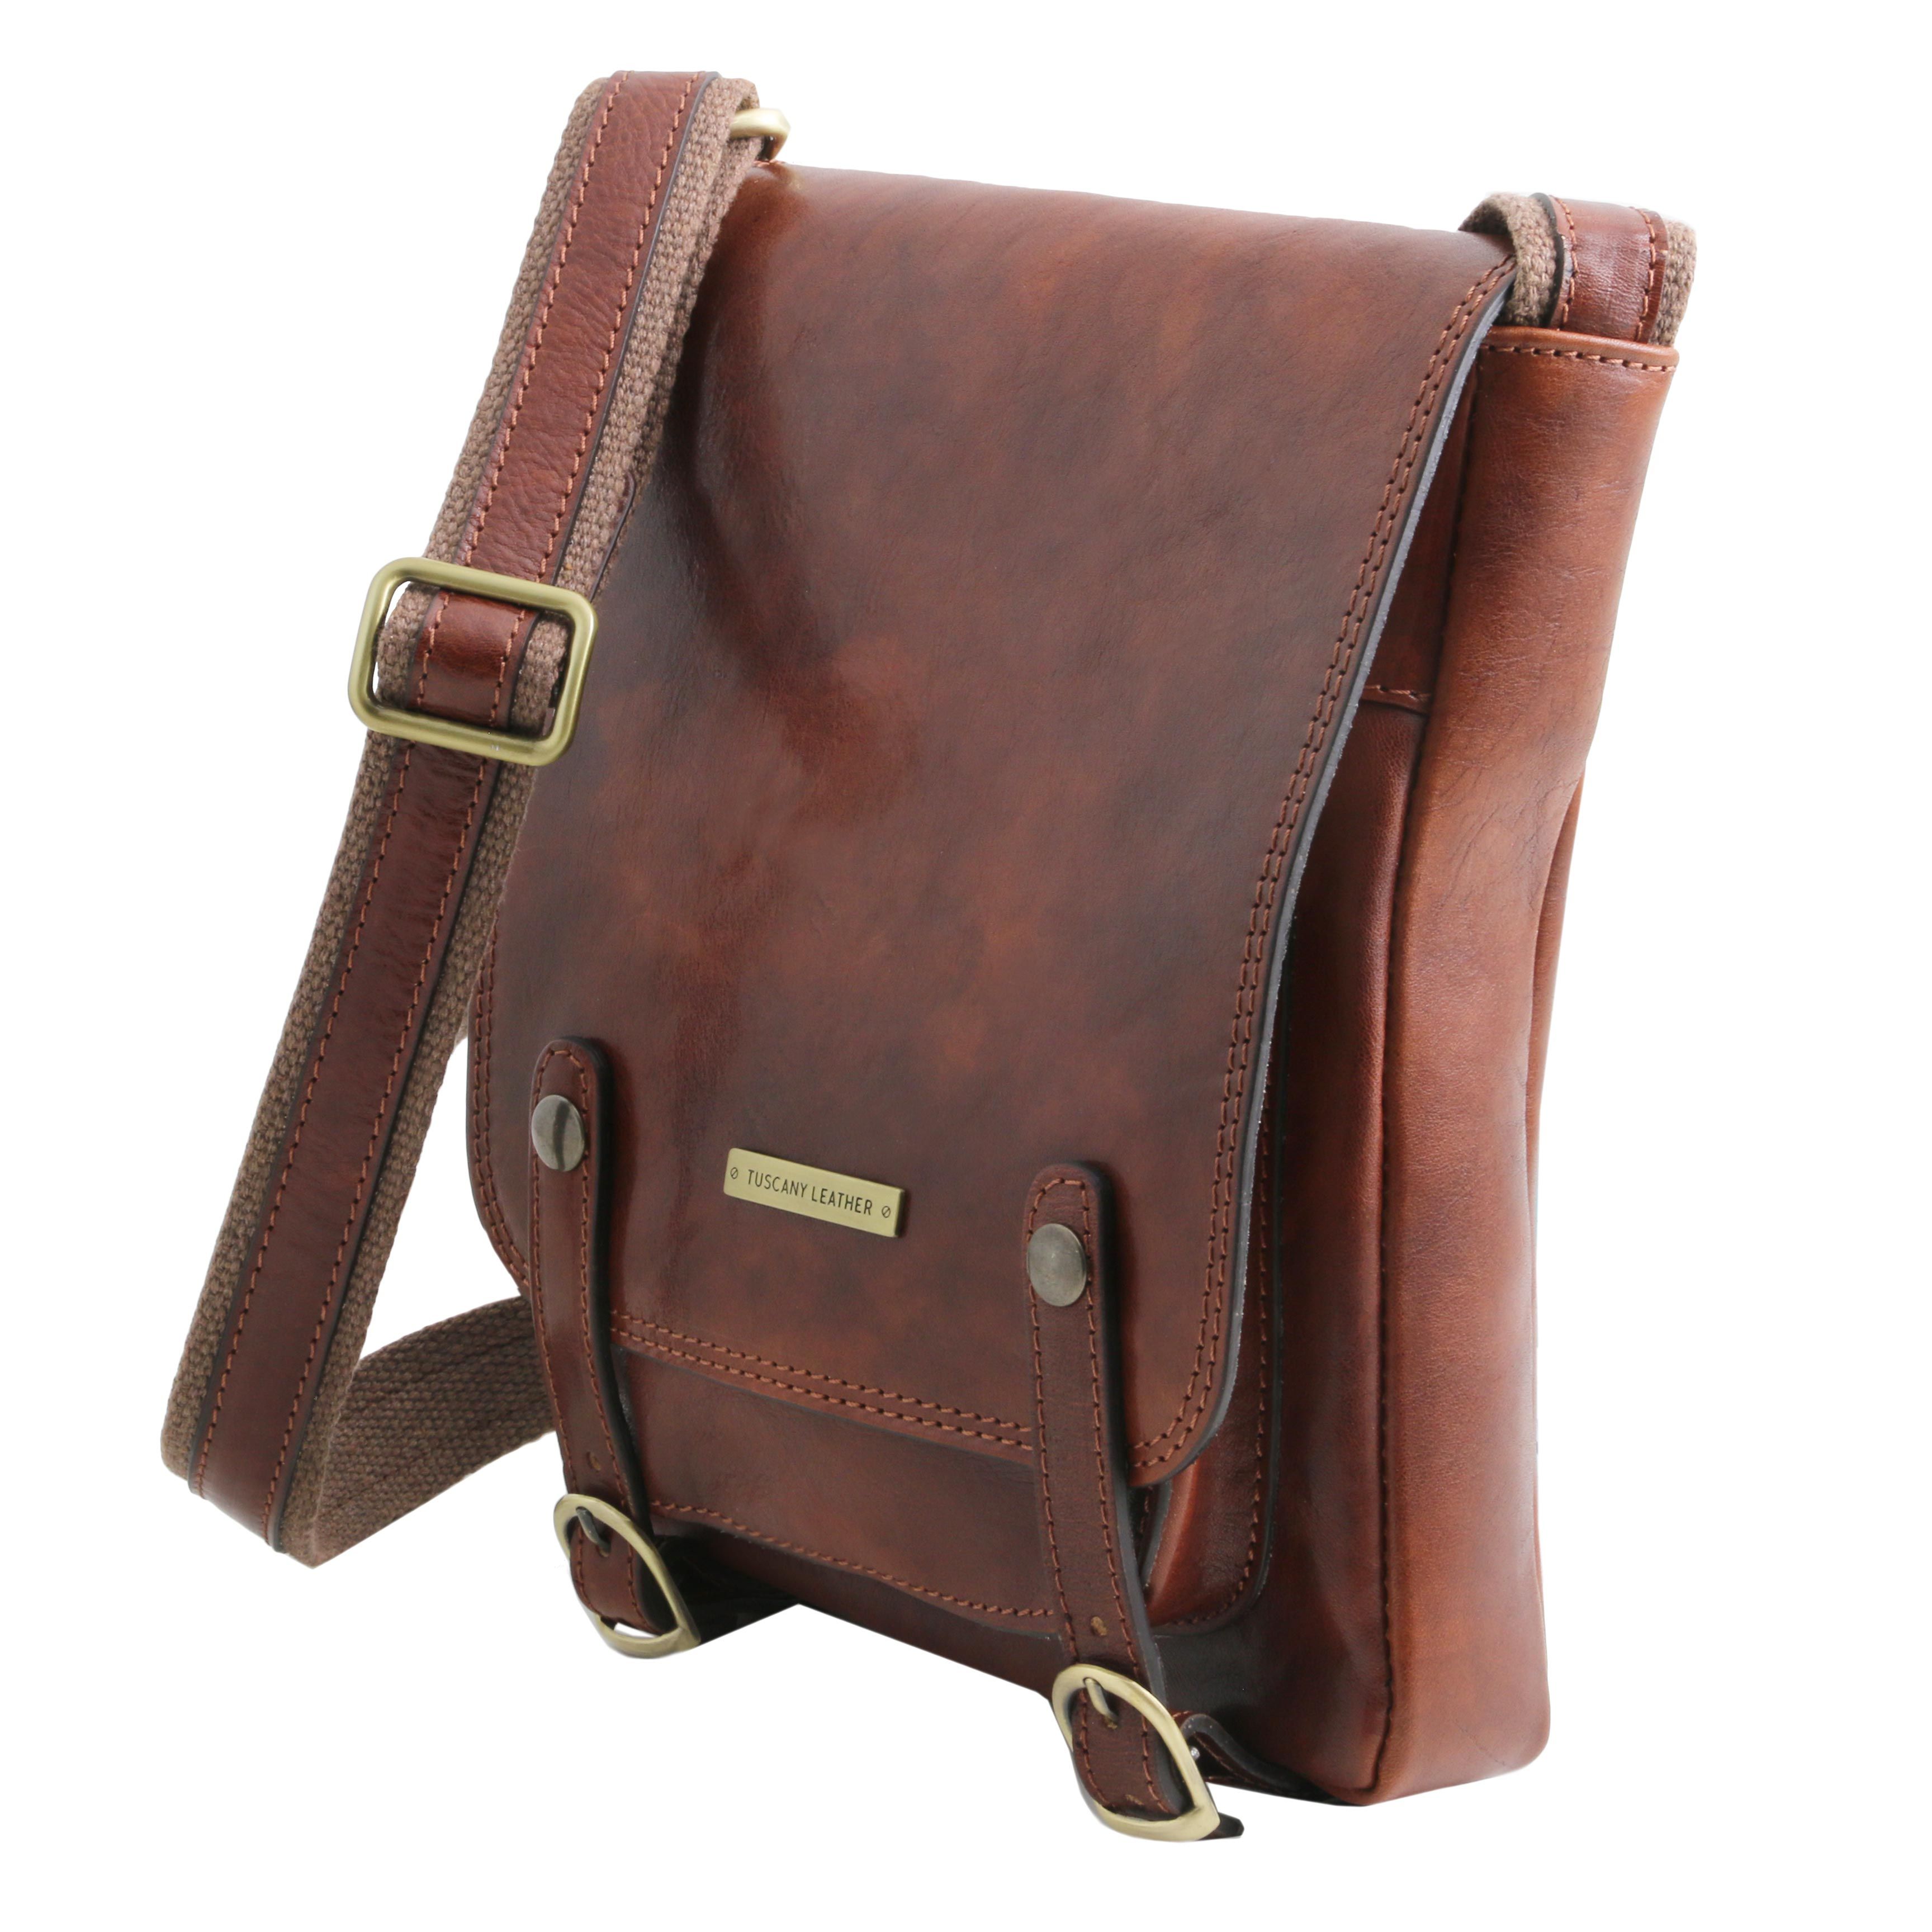 Roby Leather cross-body bag for men with front straps